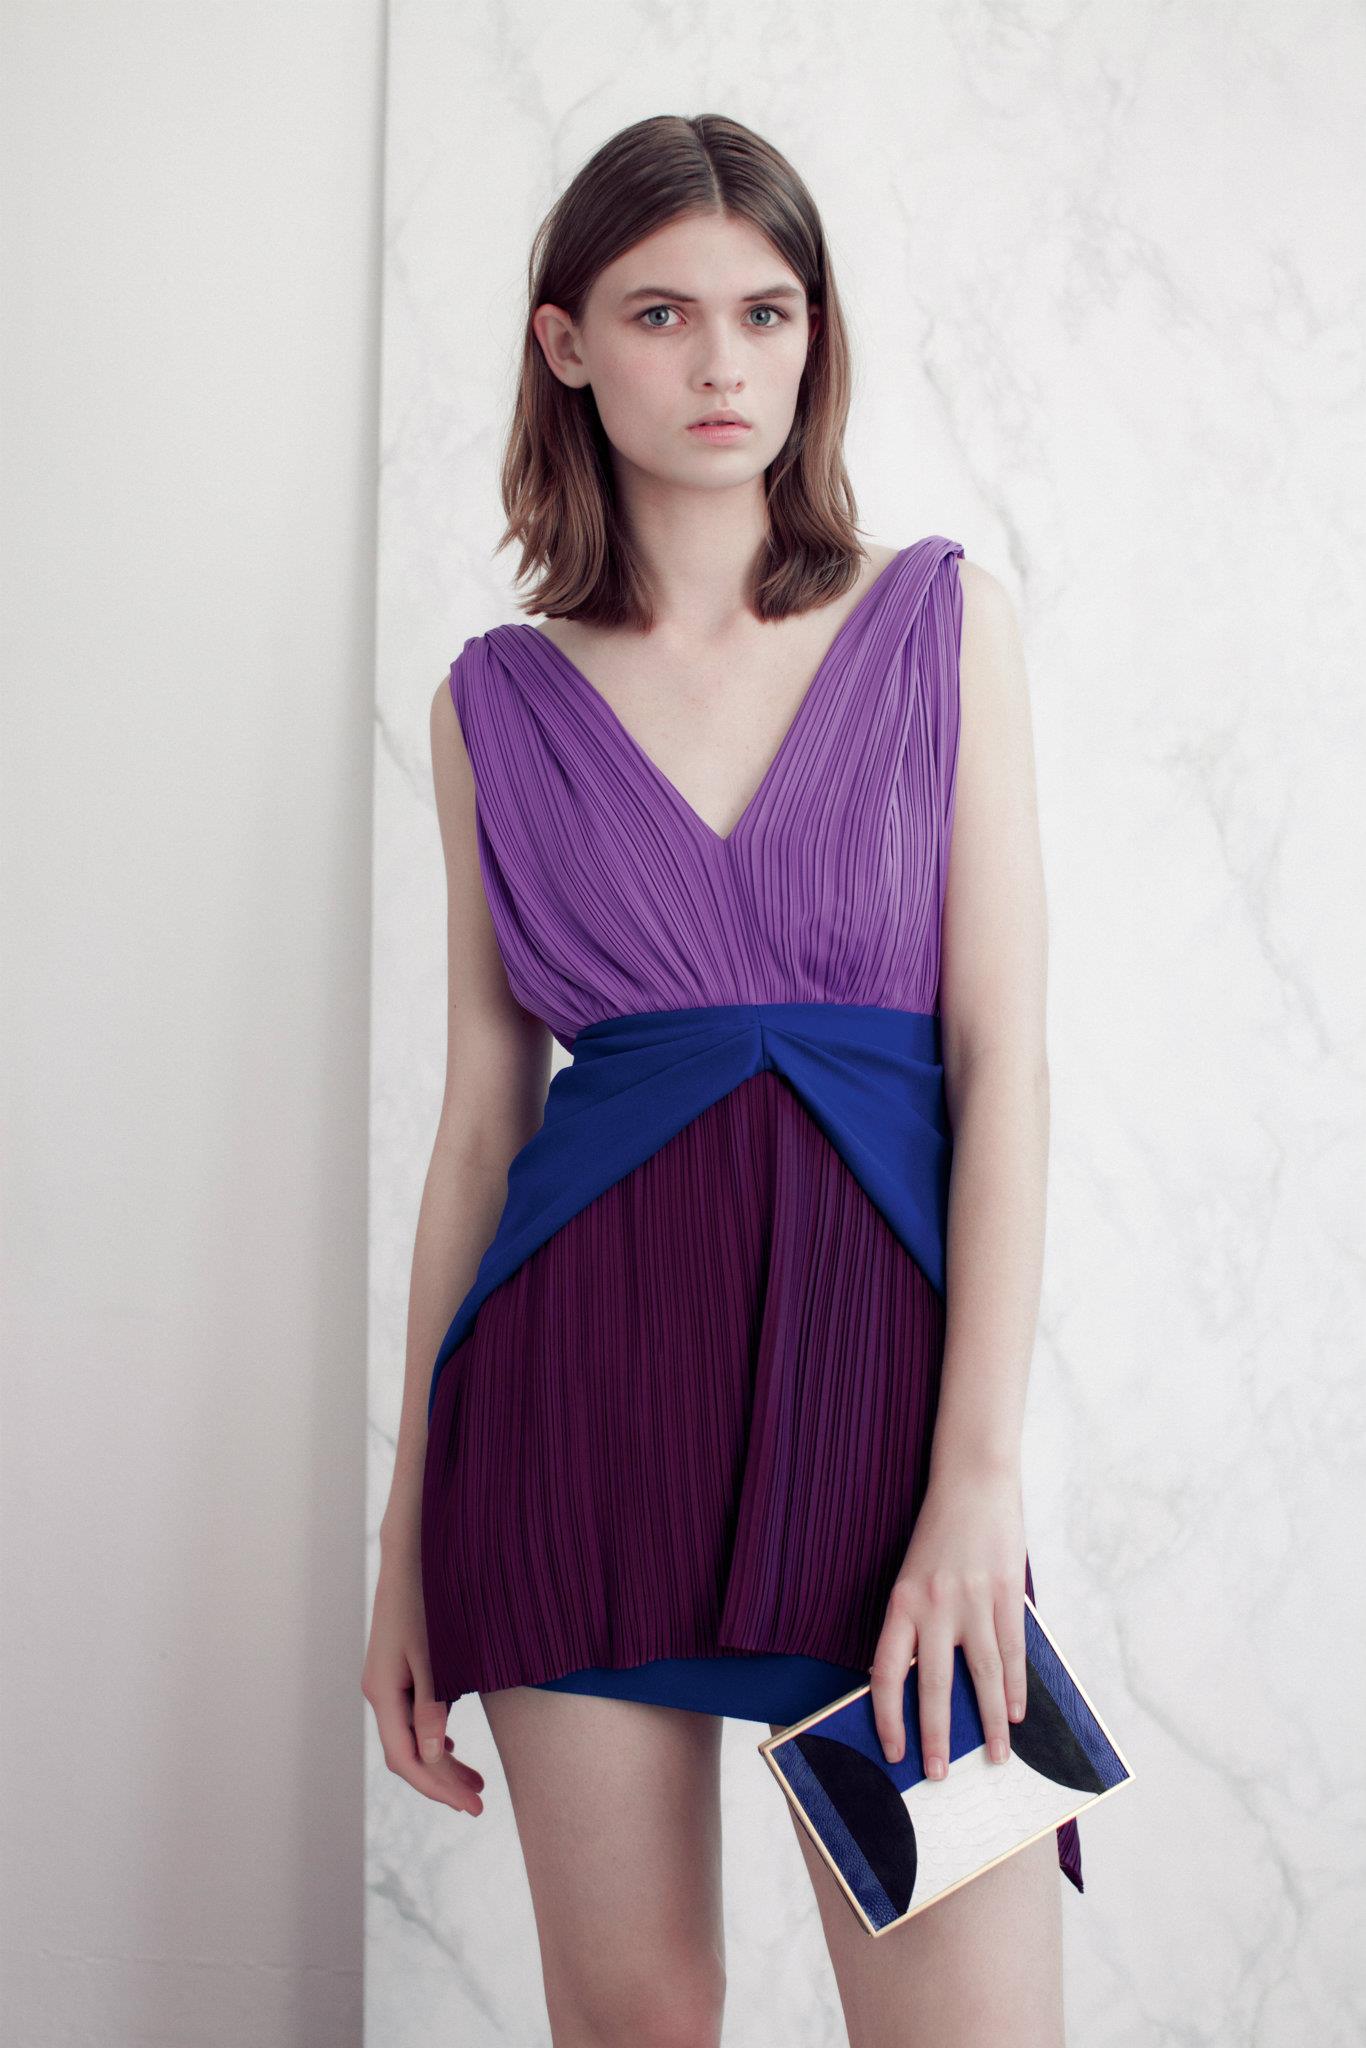 Vionnet Spring 2013 Collection 4